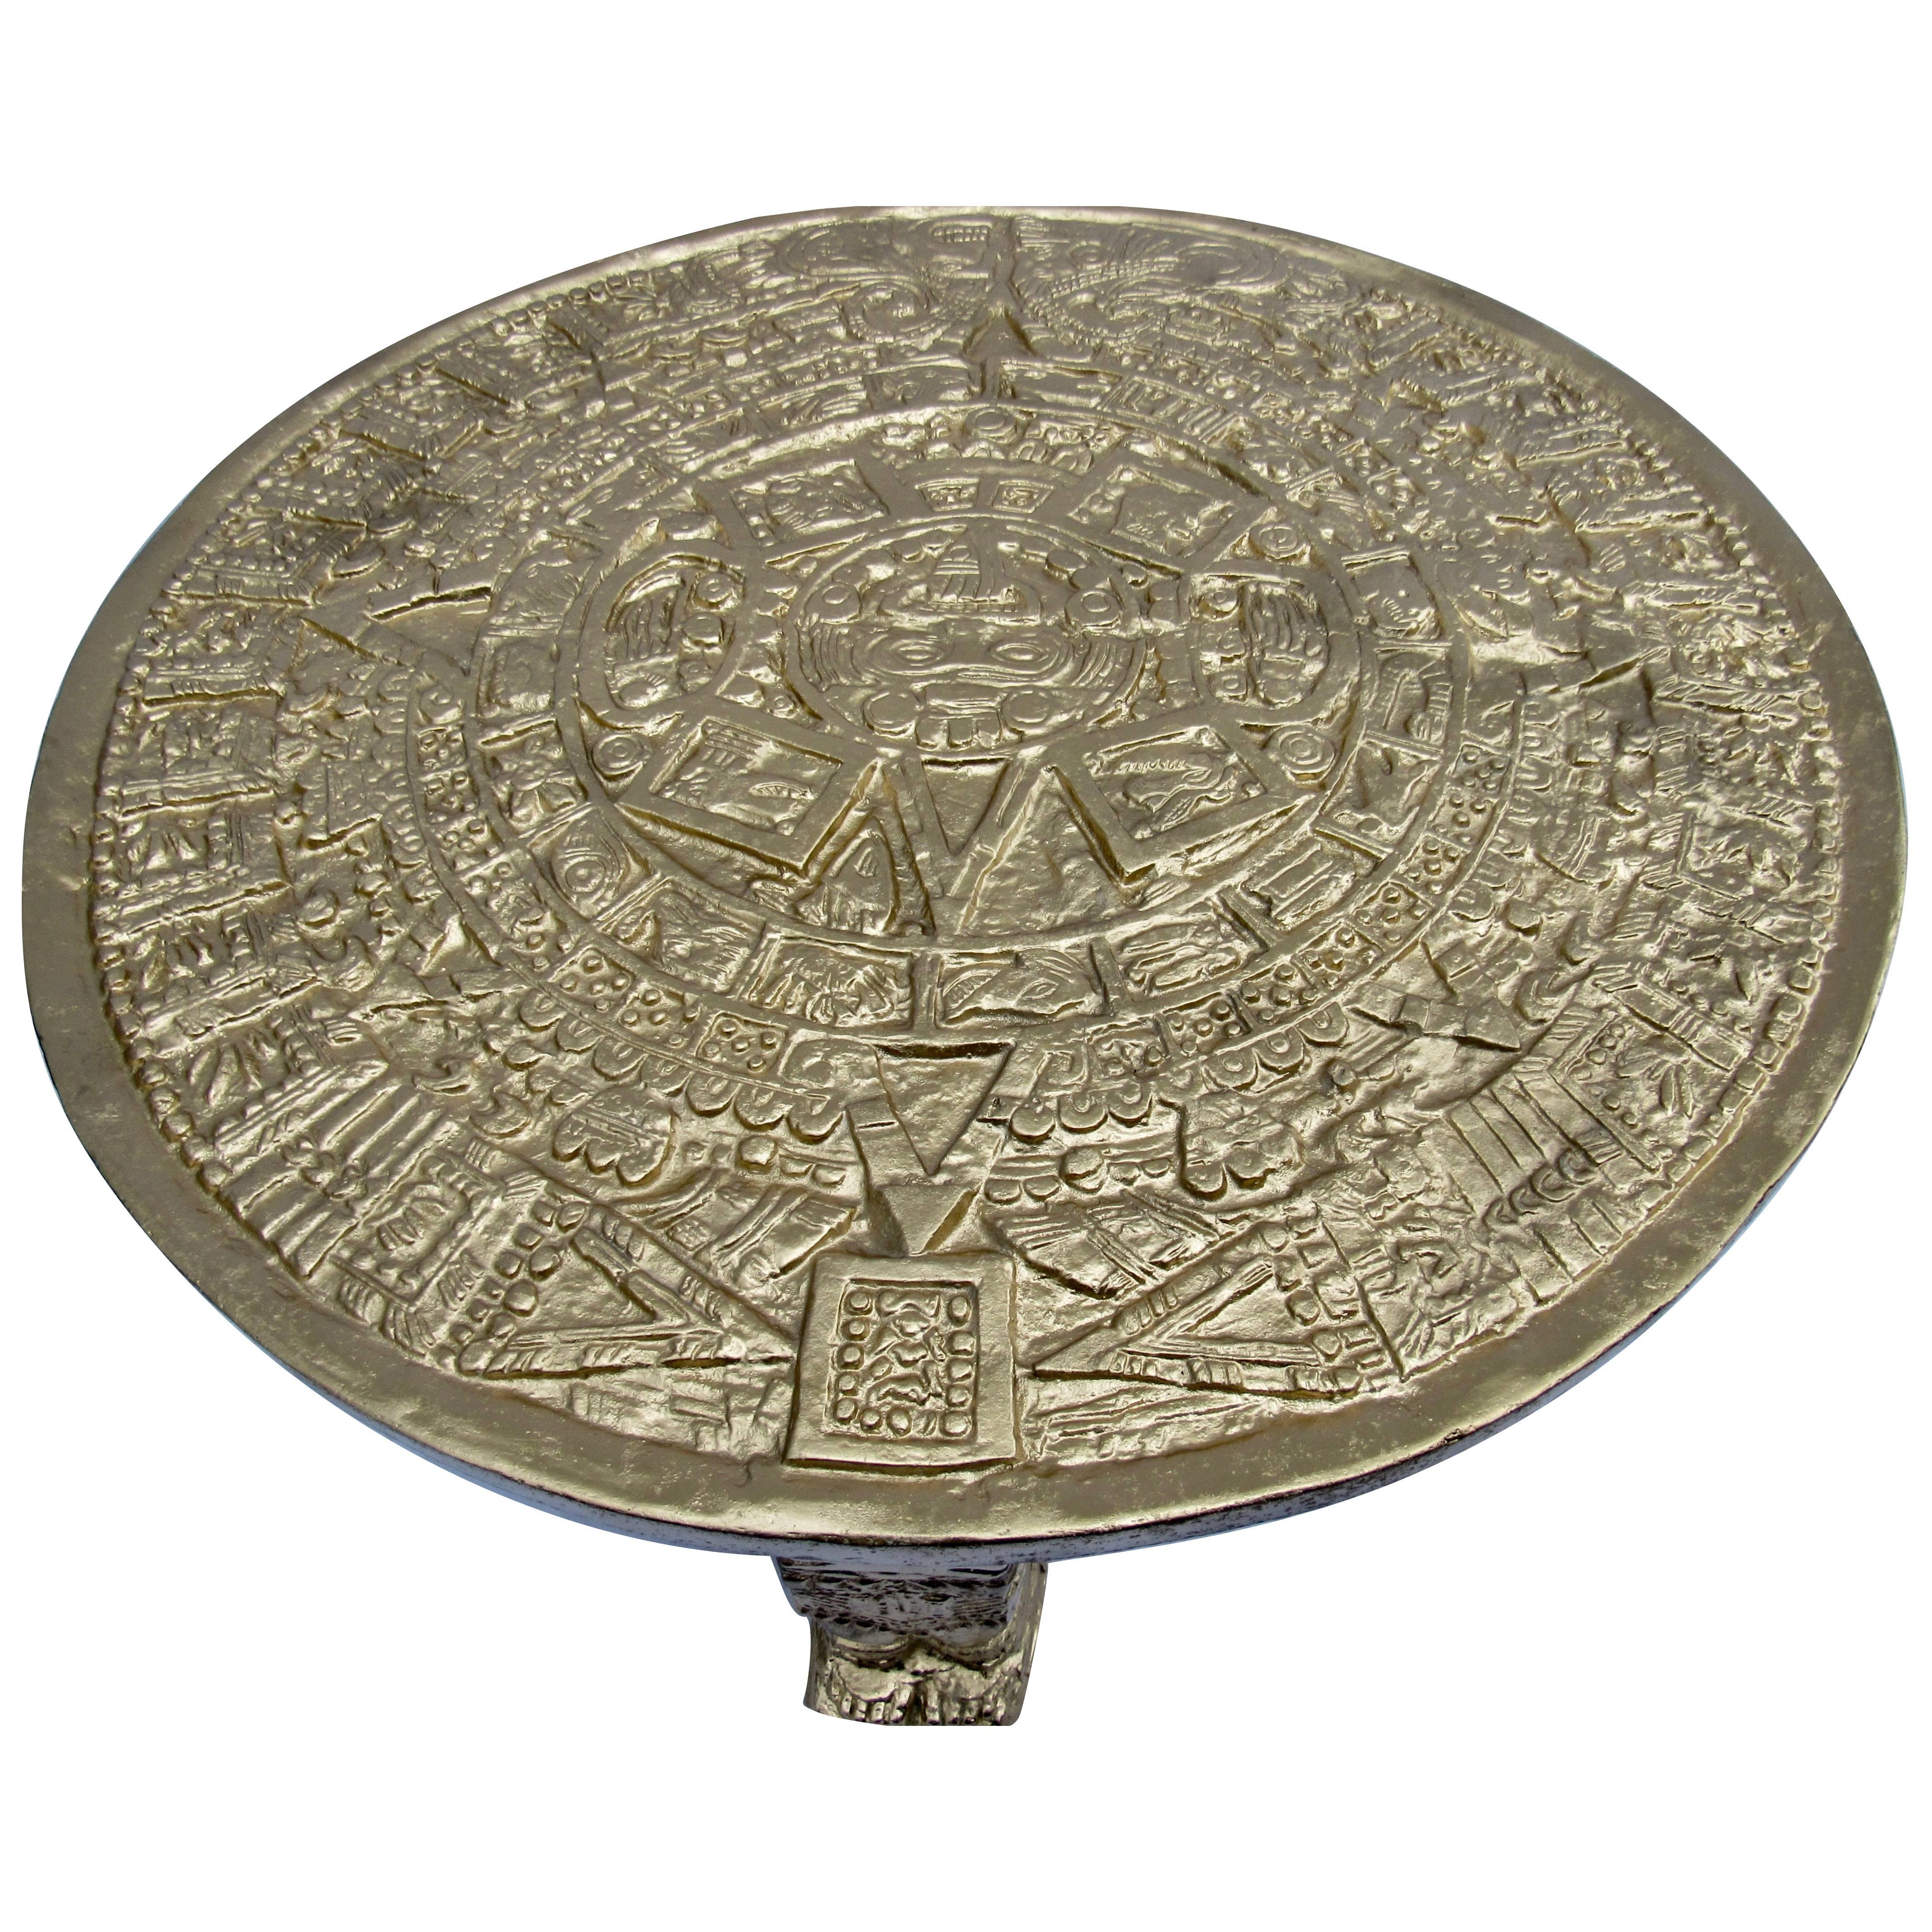 A 1960s Mexican gilded cast aluminum Aztec calendar rests on three cast Aztec sarcophagus figures. The table base weighs 65 lb.s. and is a modernist interpretation of the Pre-Columbian Classic Aztec stone calendar. 
The table measures 110 cm. by 40